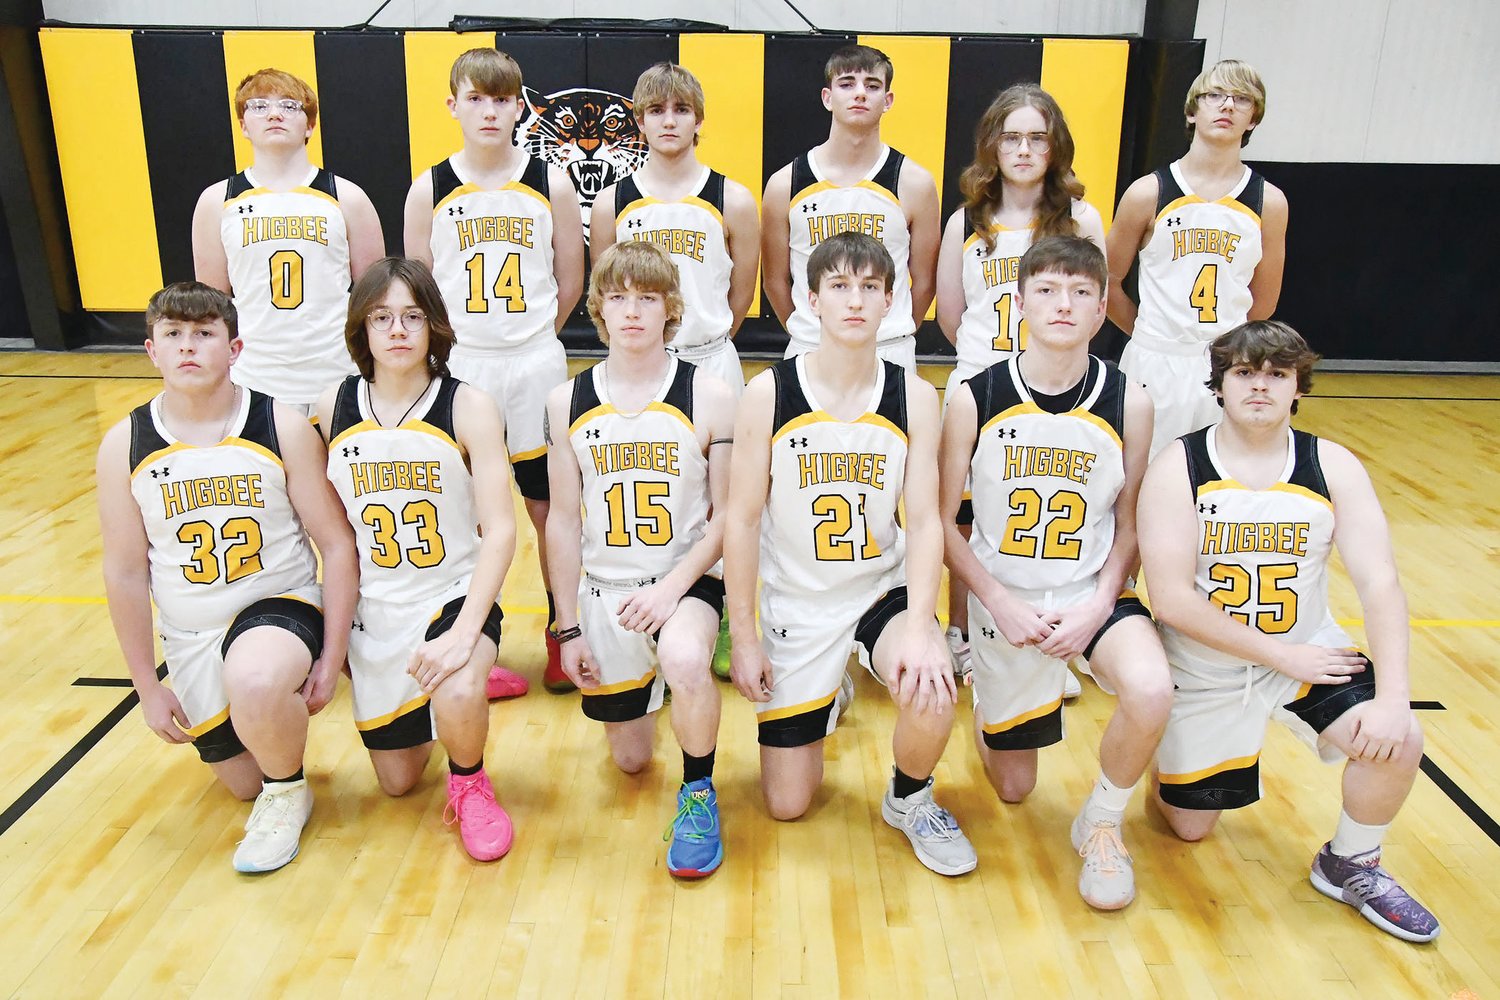 The Higbee High School boys' basketball team gathered for a team photo on Tuesday before playing Bevier. Here's the squad. Front row (from left) Landon Tuggle, Danny Janssen, Chad Crawford, Jaxon Hudson, Will Spilman and Aiden Freidin. Back row, Mason Martin, Celton Crawford, Chevy Grimsley, Derek Rockett, Micah Kirby and J.D. Umstattd.